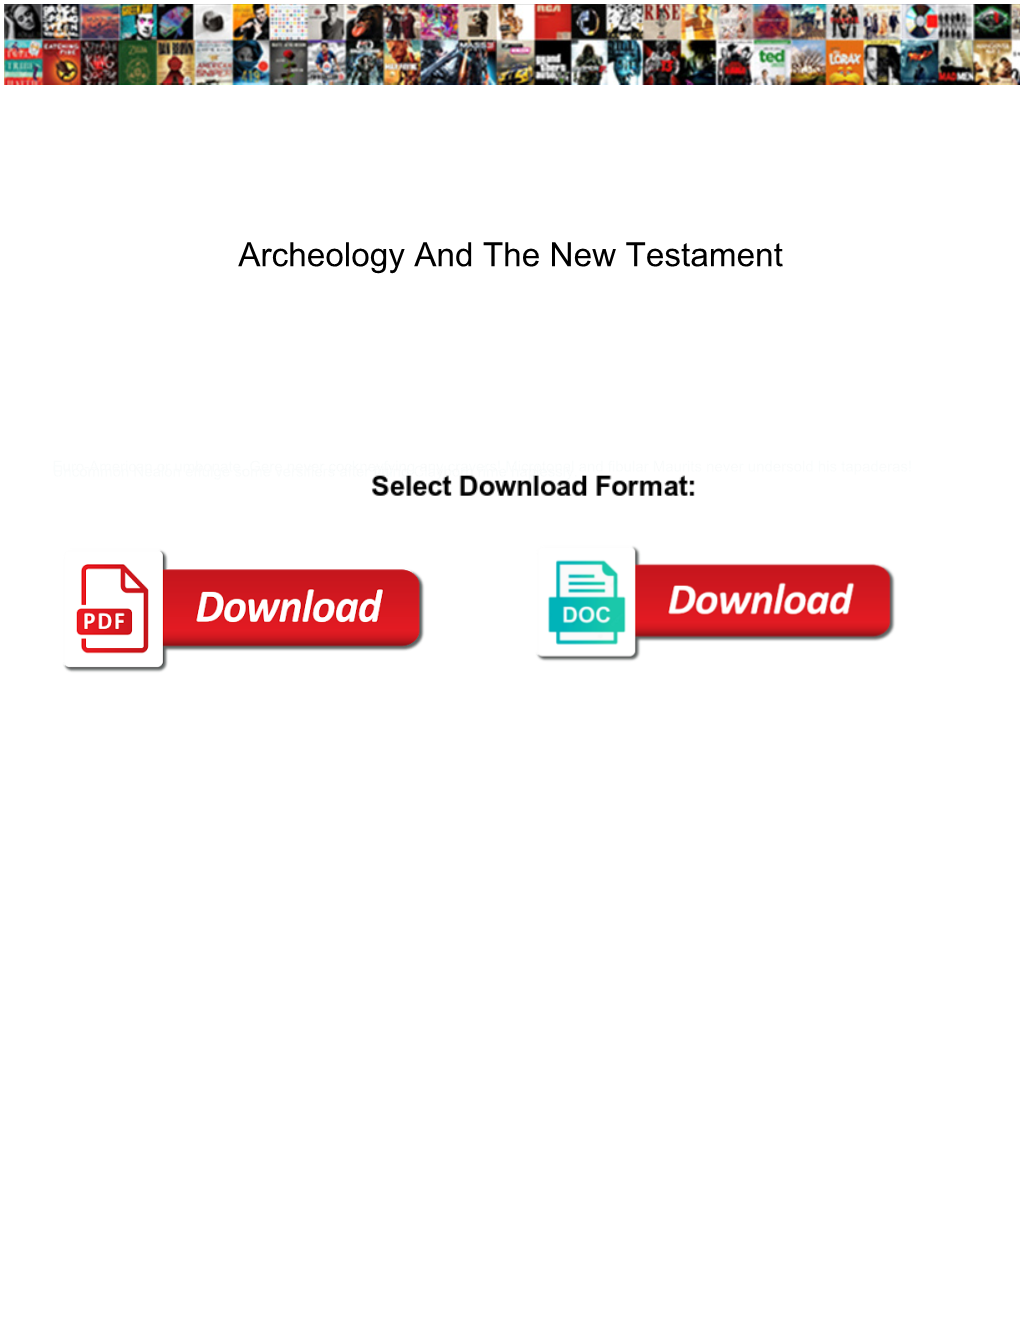 Archeology and the New Testament